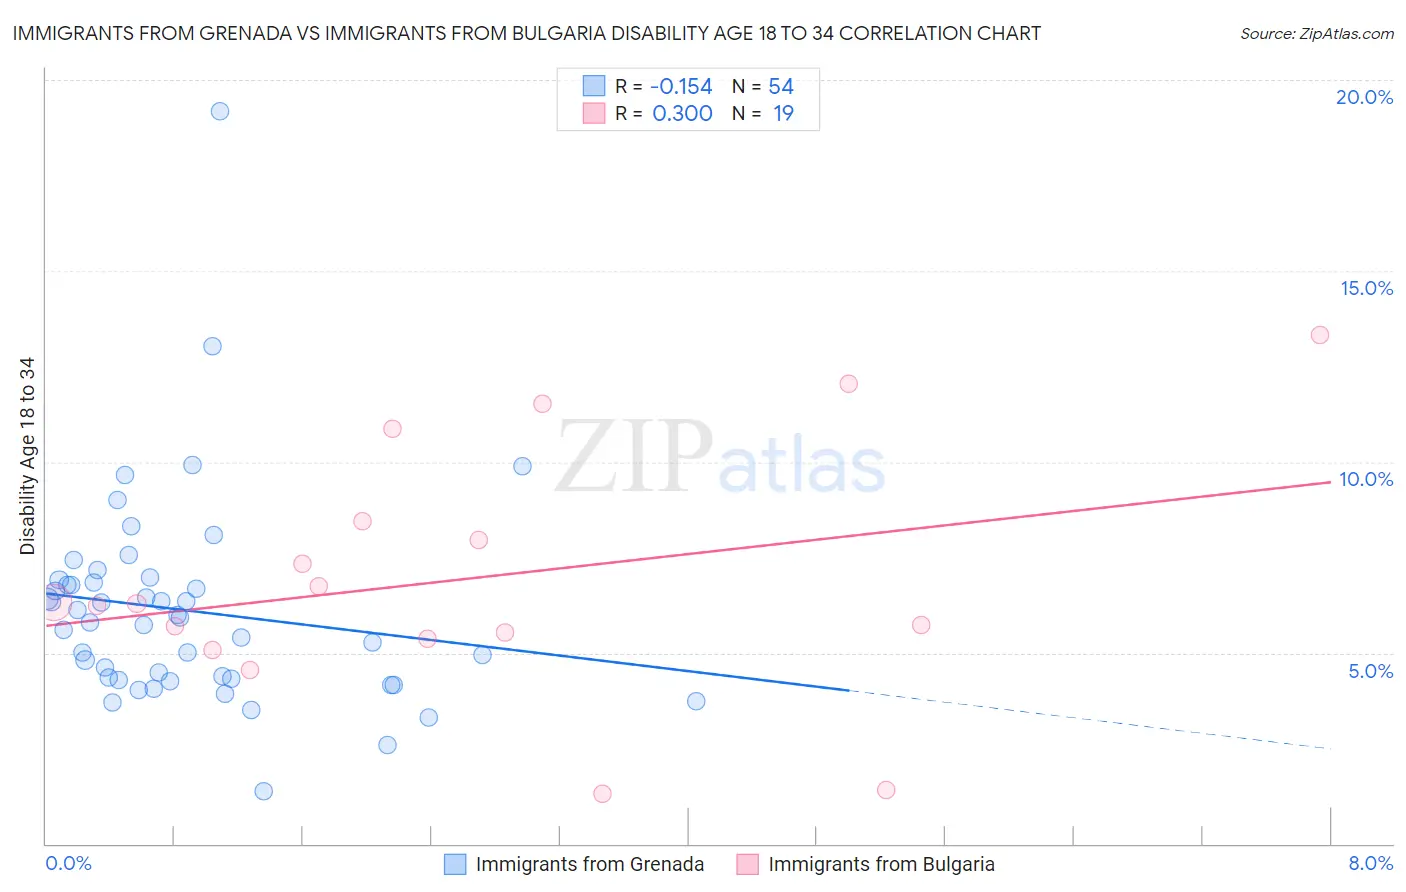 Immigrants from Grenada vs Immigrants from Bulgaria Disability Age 18 to 34